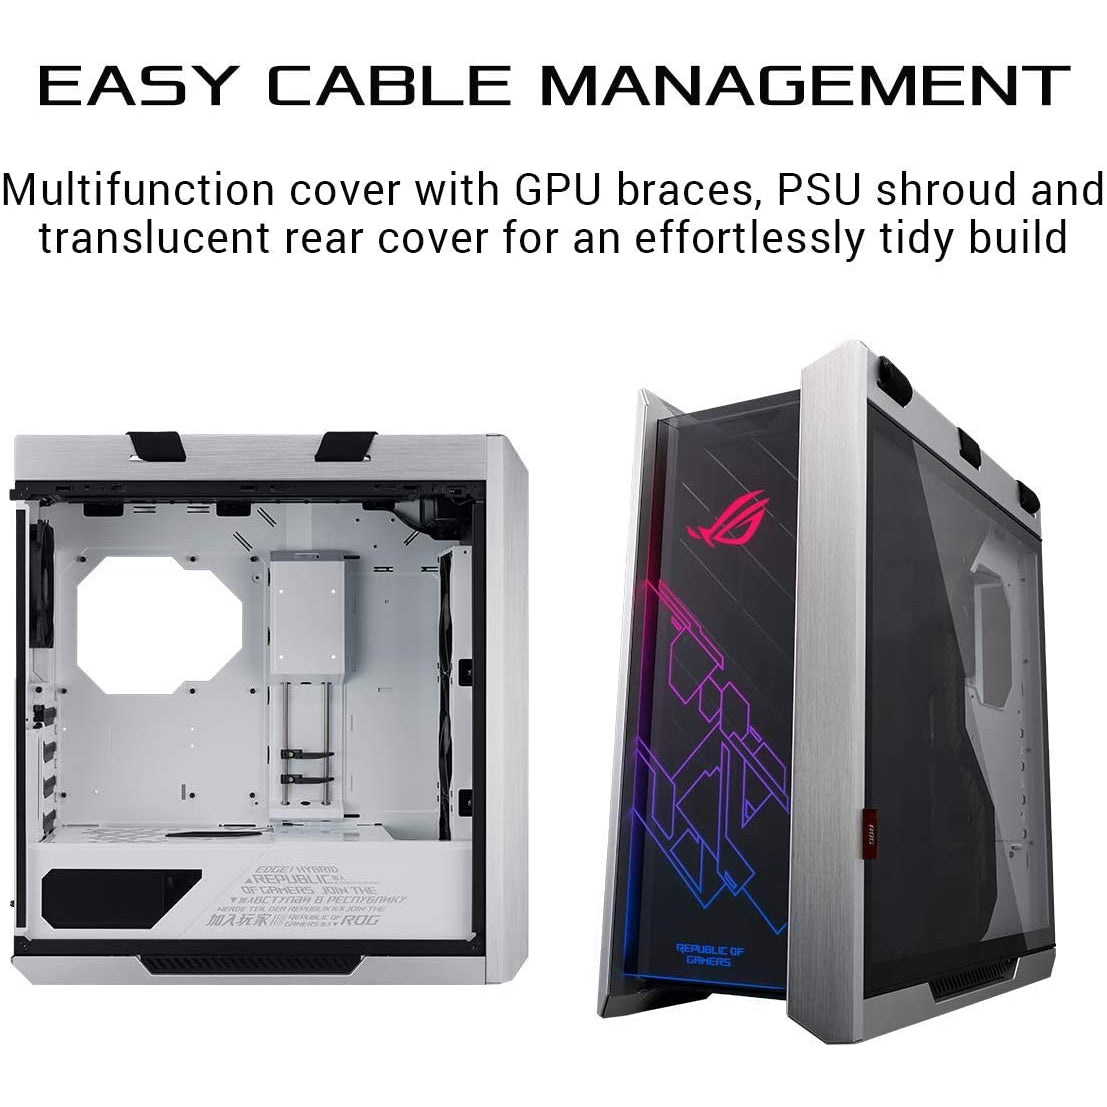 Asus Rog Strix Helios GX601 White Edition RGB Mid-Tower Computer Case for ATX/EATX Motherboards with tempered glass